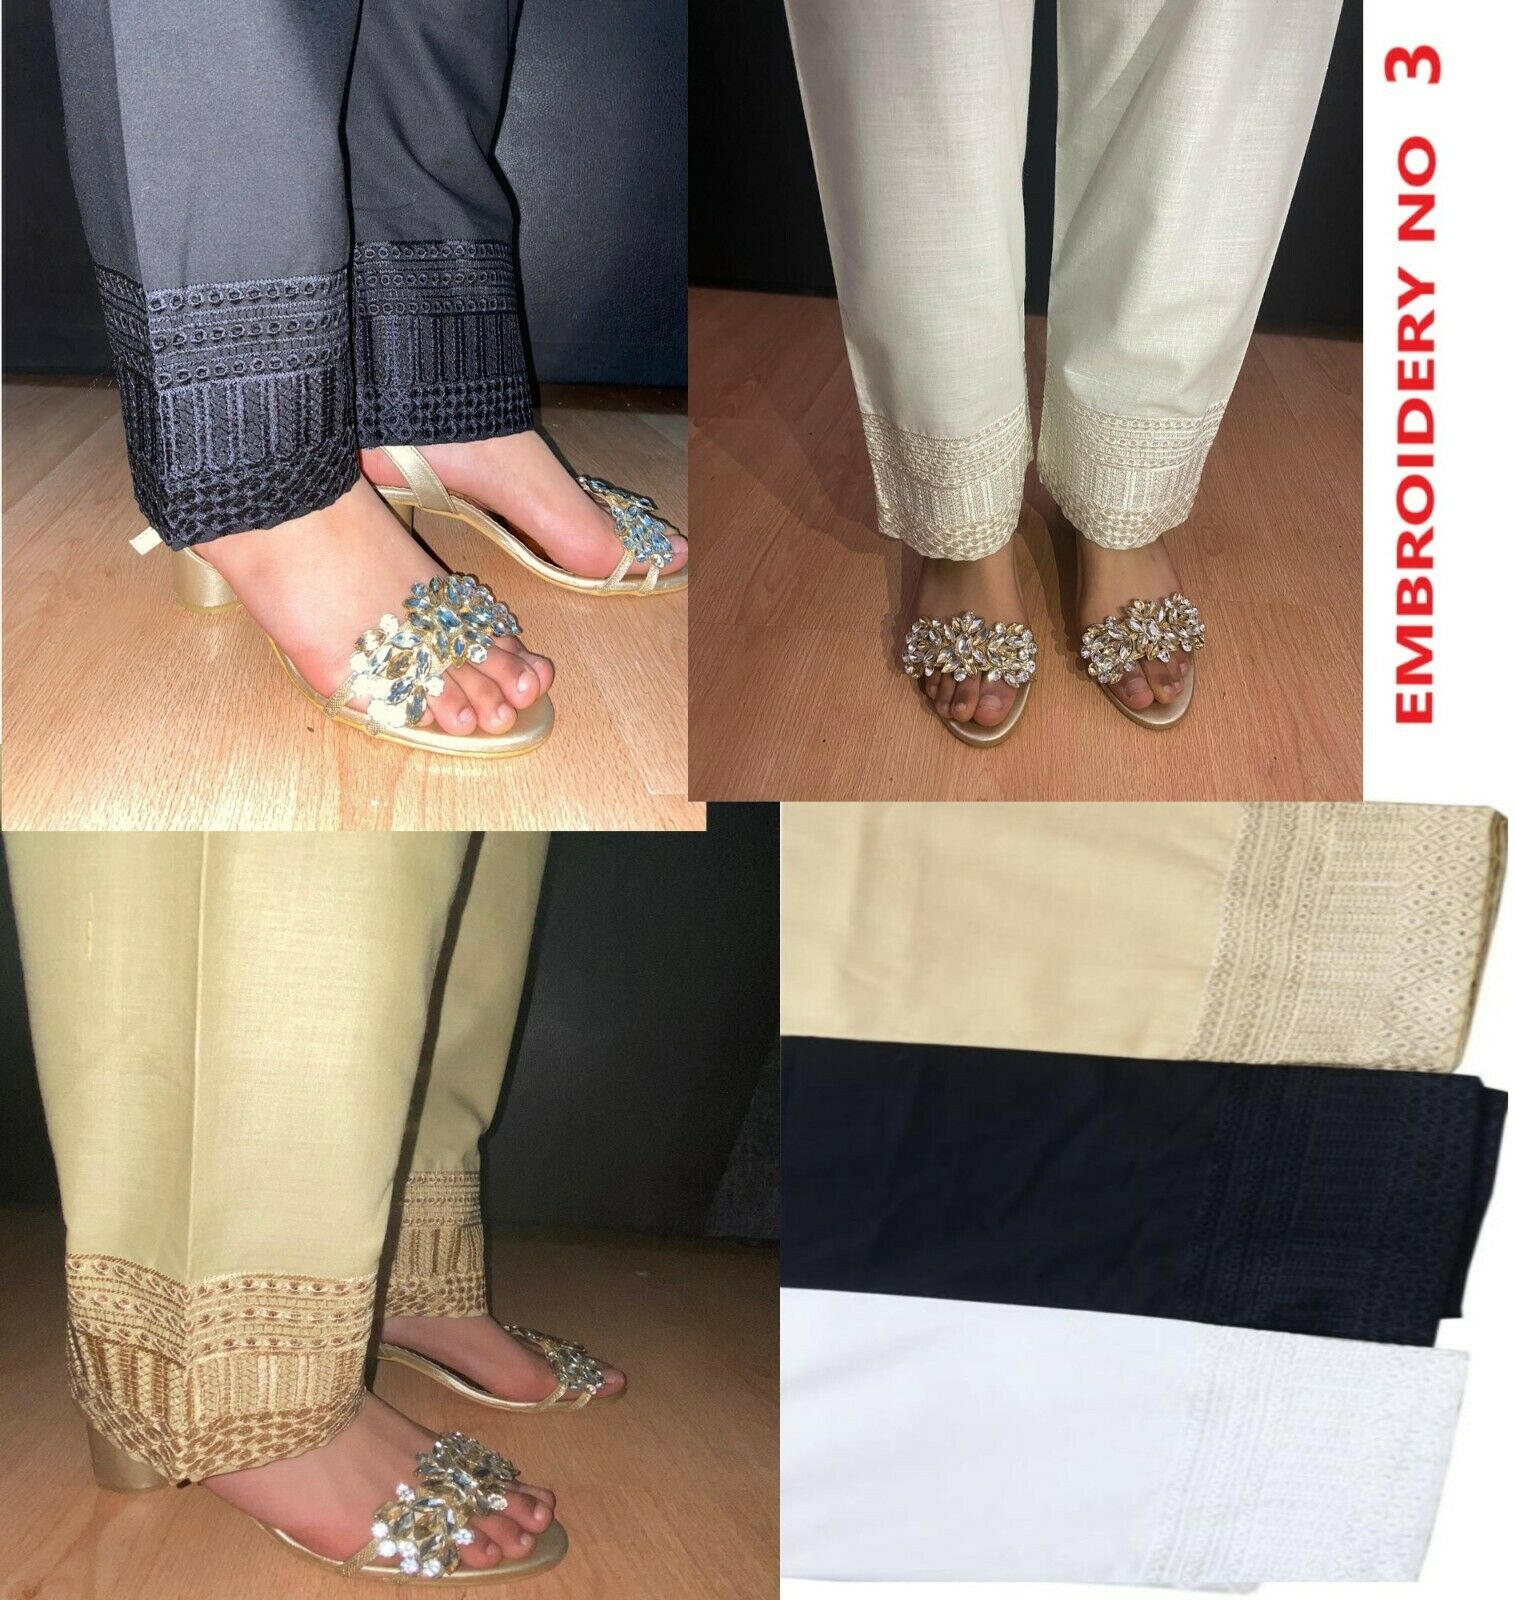 Ladies Trouser Design And Jeans Design:Amazon.in:Appstore for Android